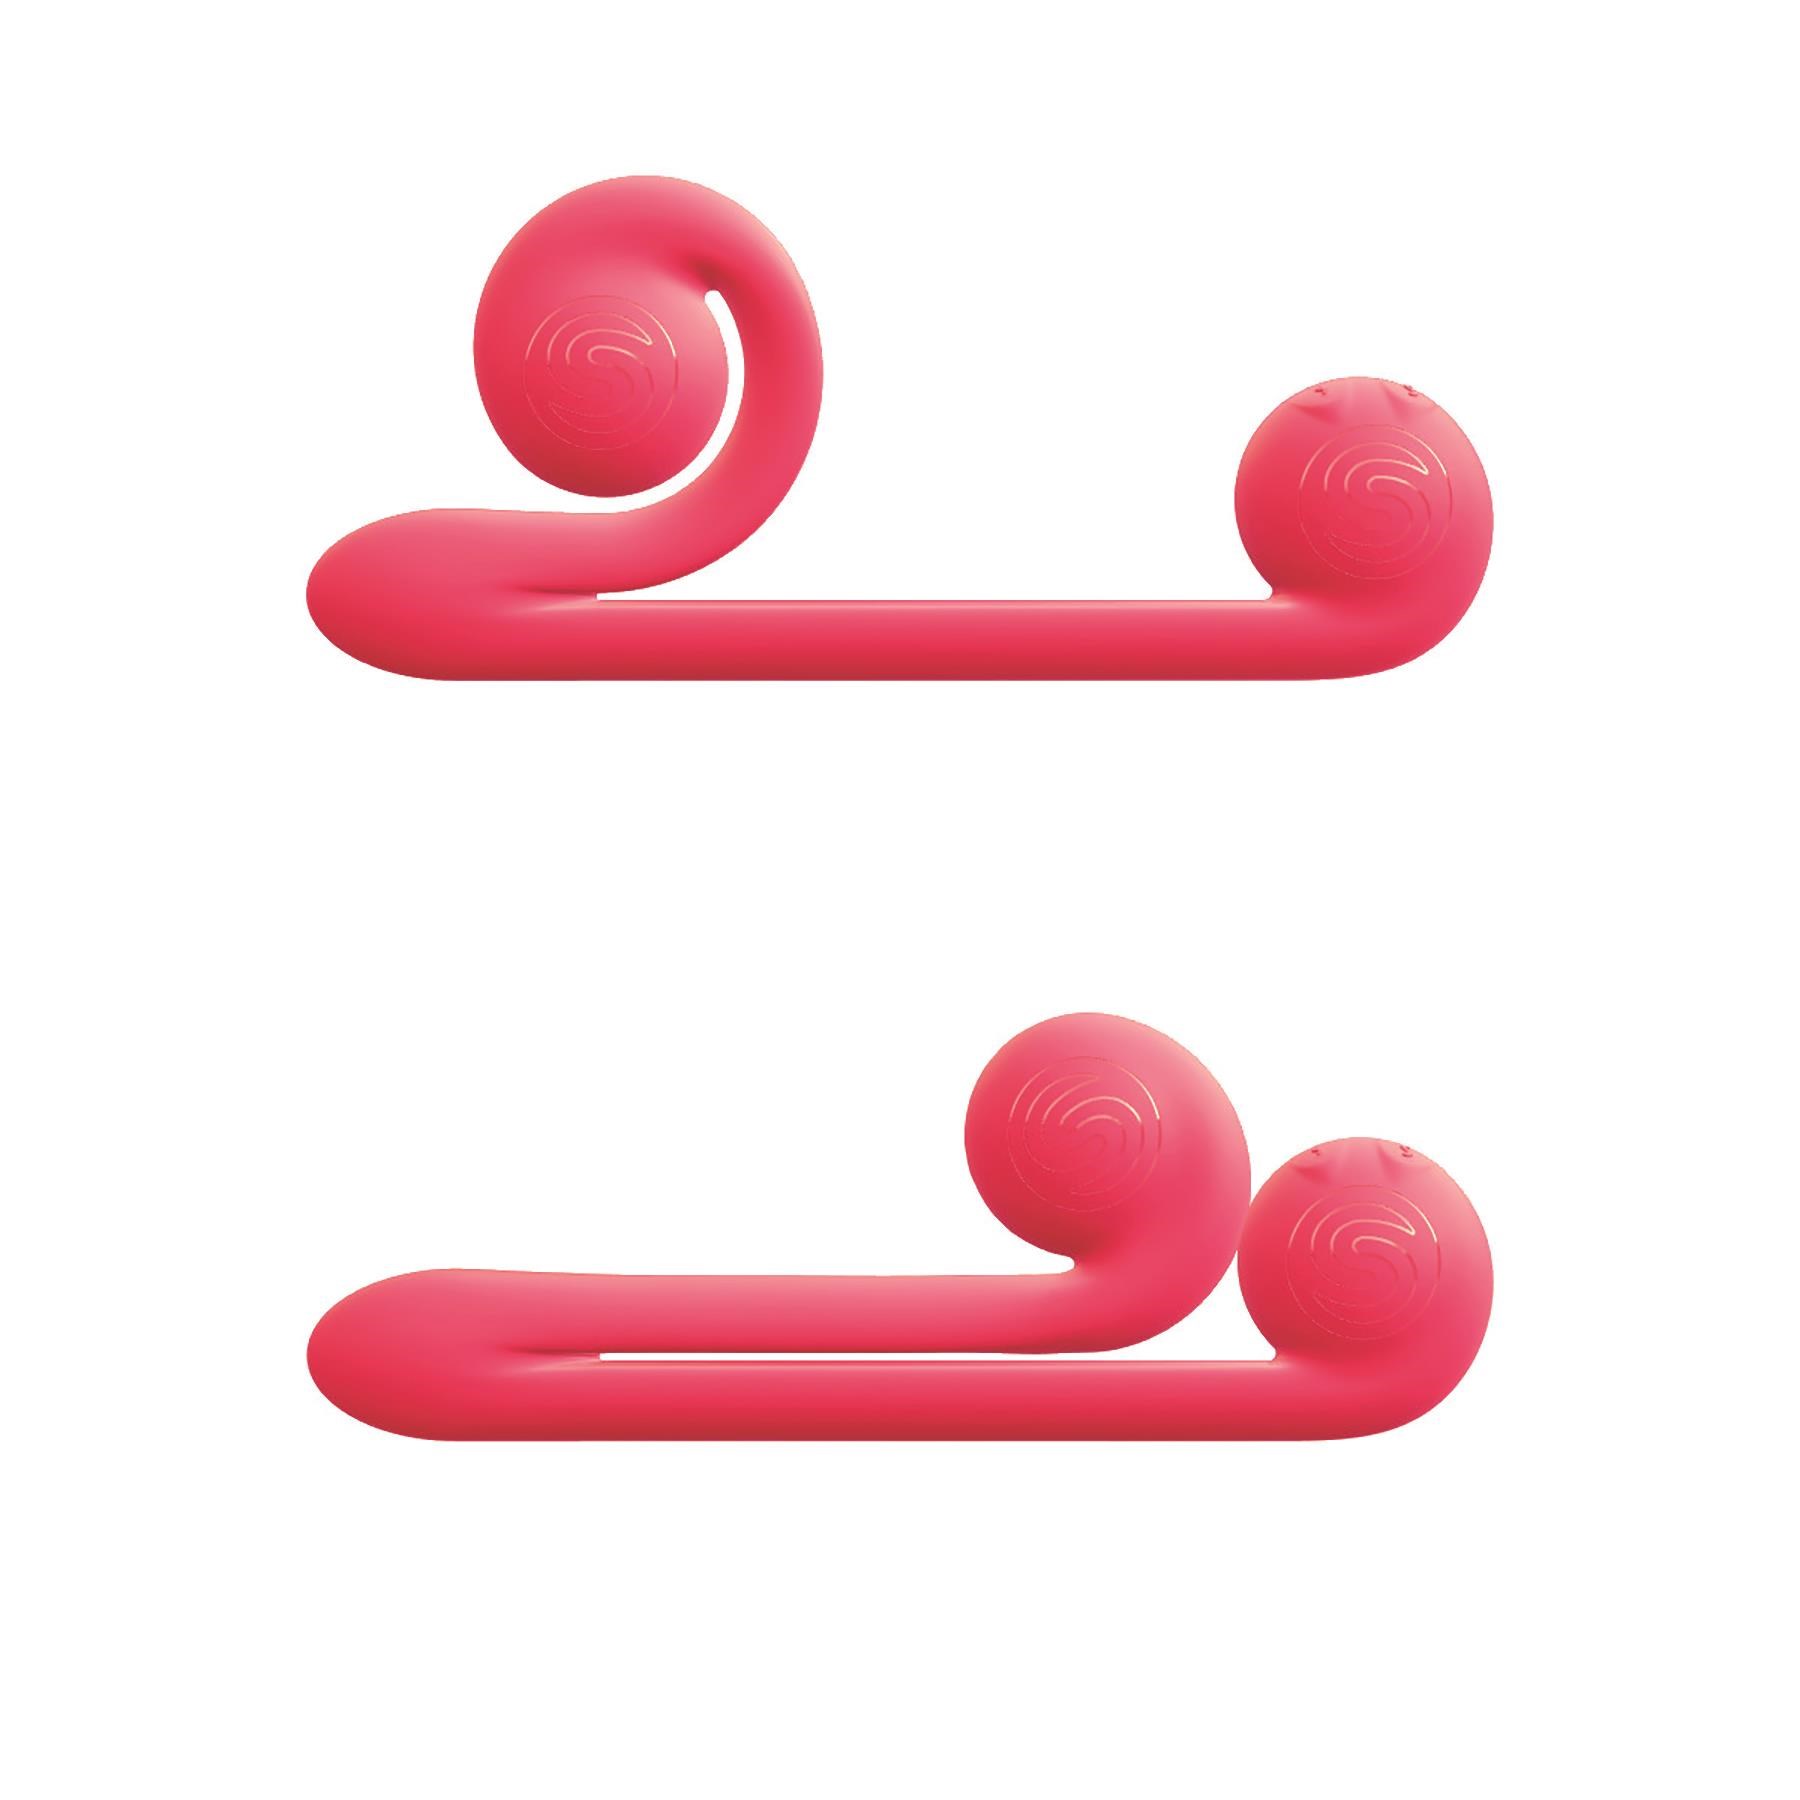 Snail Dual Stimulating Vibrator - Showing Both Positions